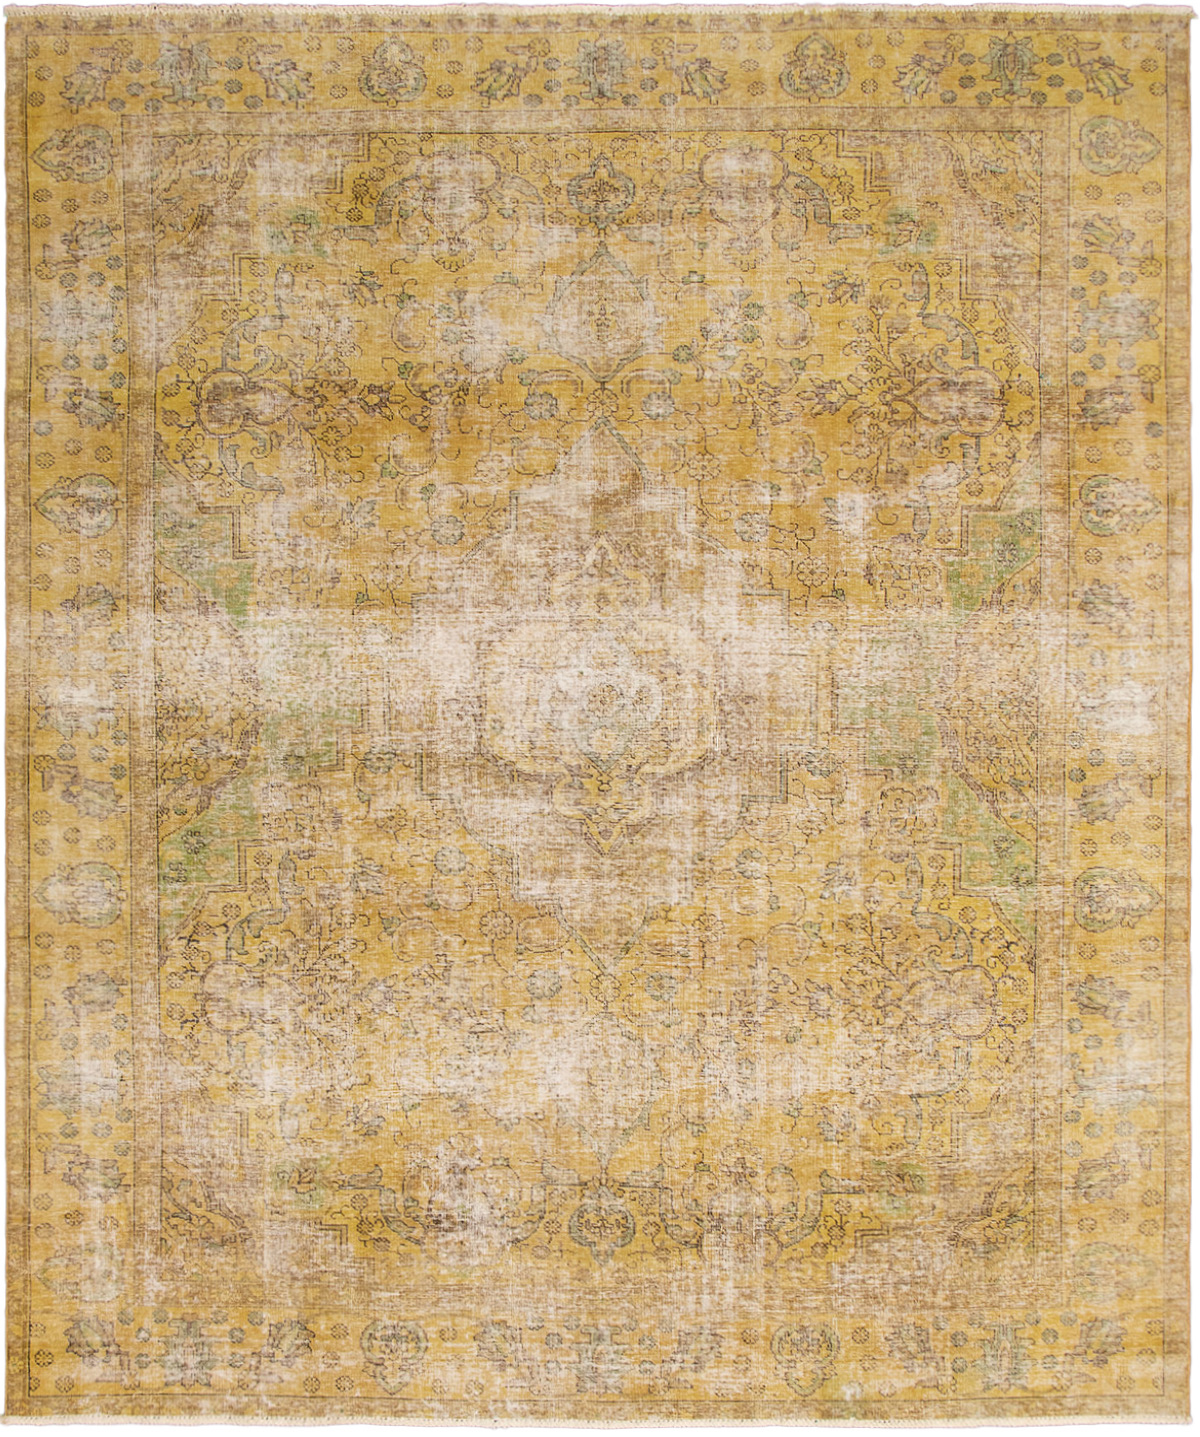 Hand-knotted Color Transition Olive Wool Rug 9'9" x 11'10" Size: 9'9" x 11'10"  